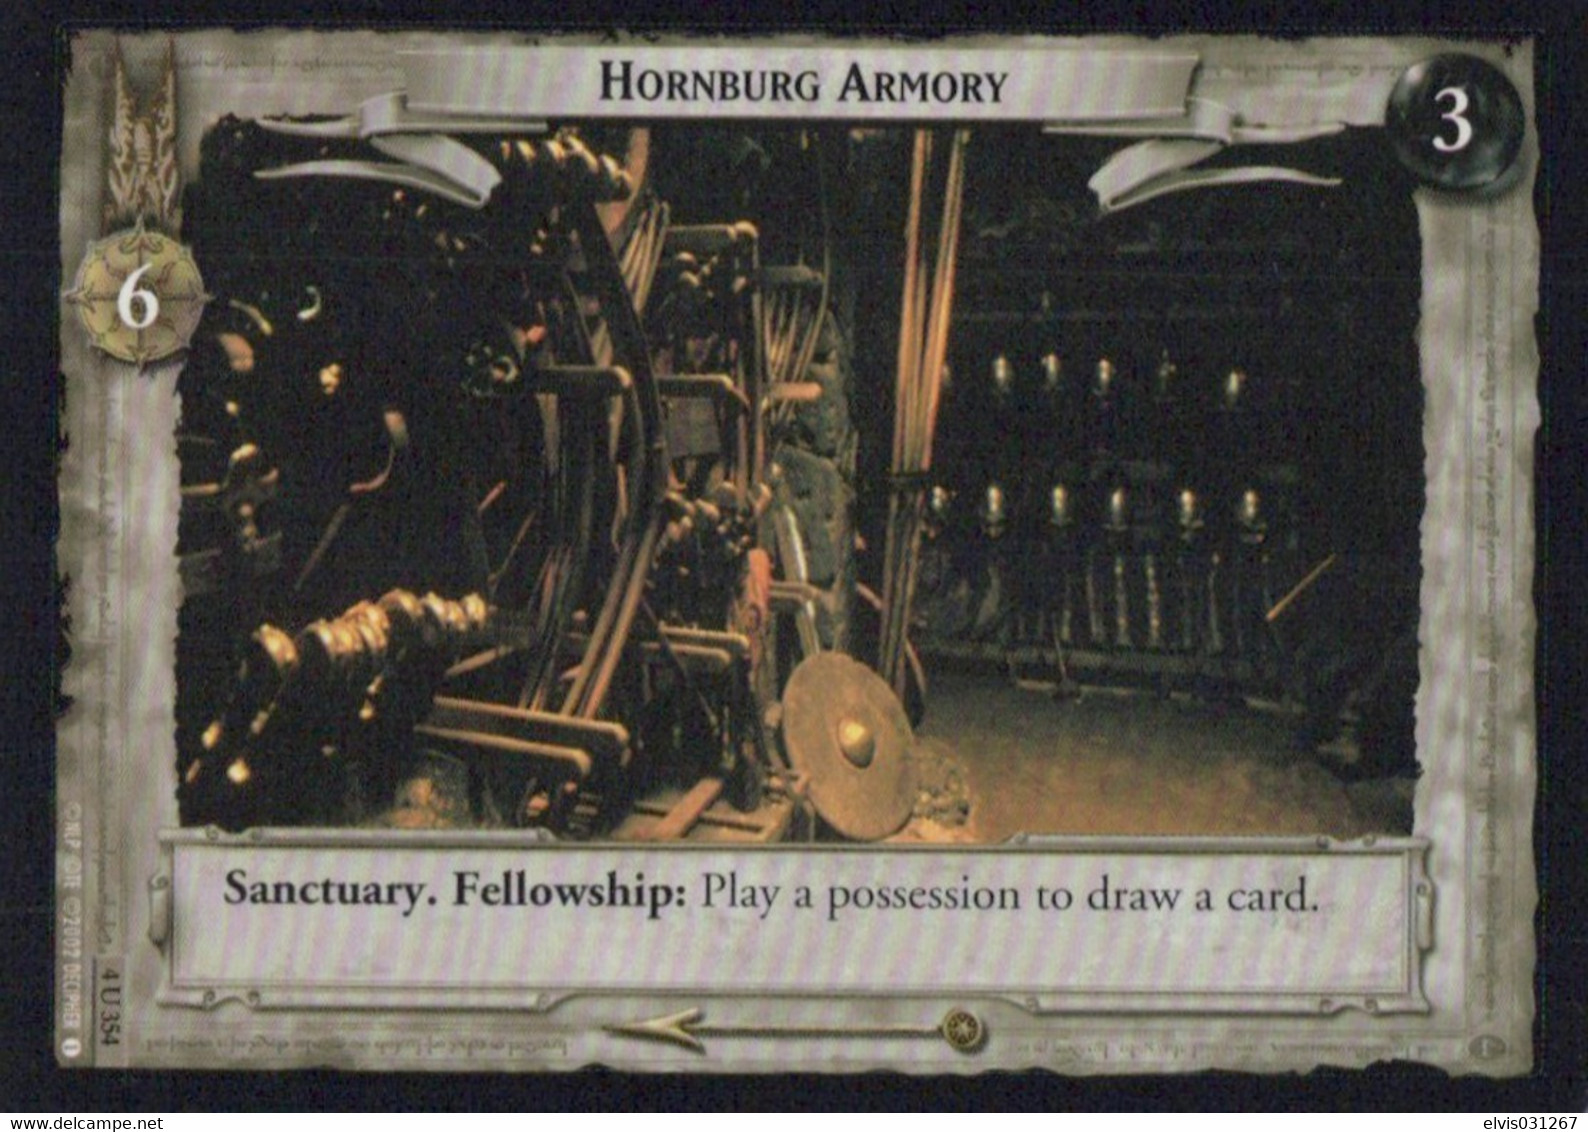 Vintage The Lord Of The Rings: #3-6 Hornburg Armory - EN - 2001-2004 - Mint Condition - Trading Card Game - Herr Der Ringe